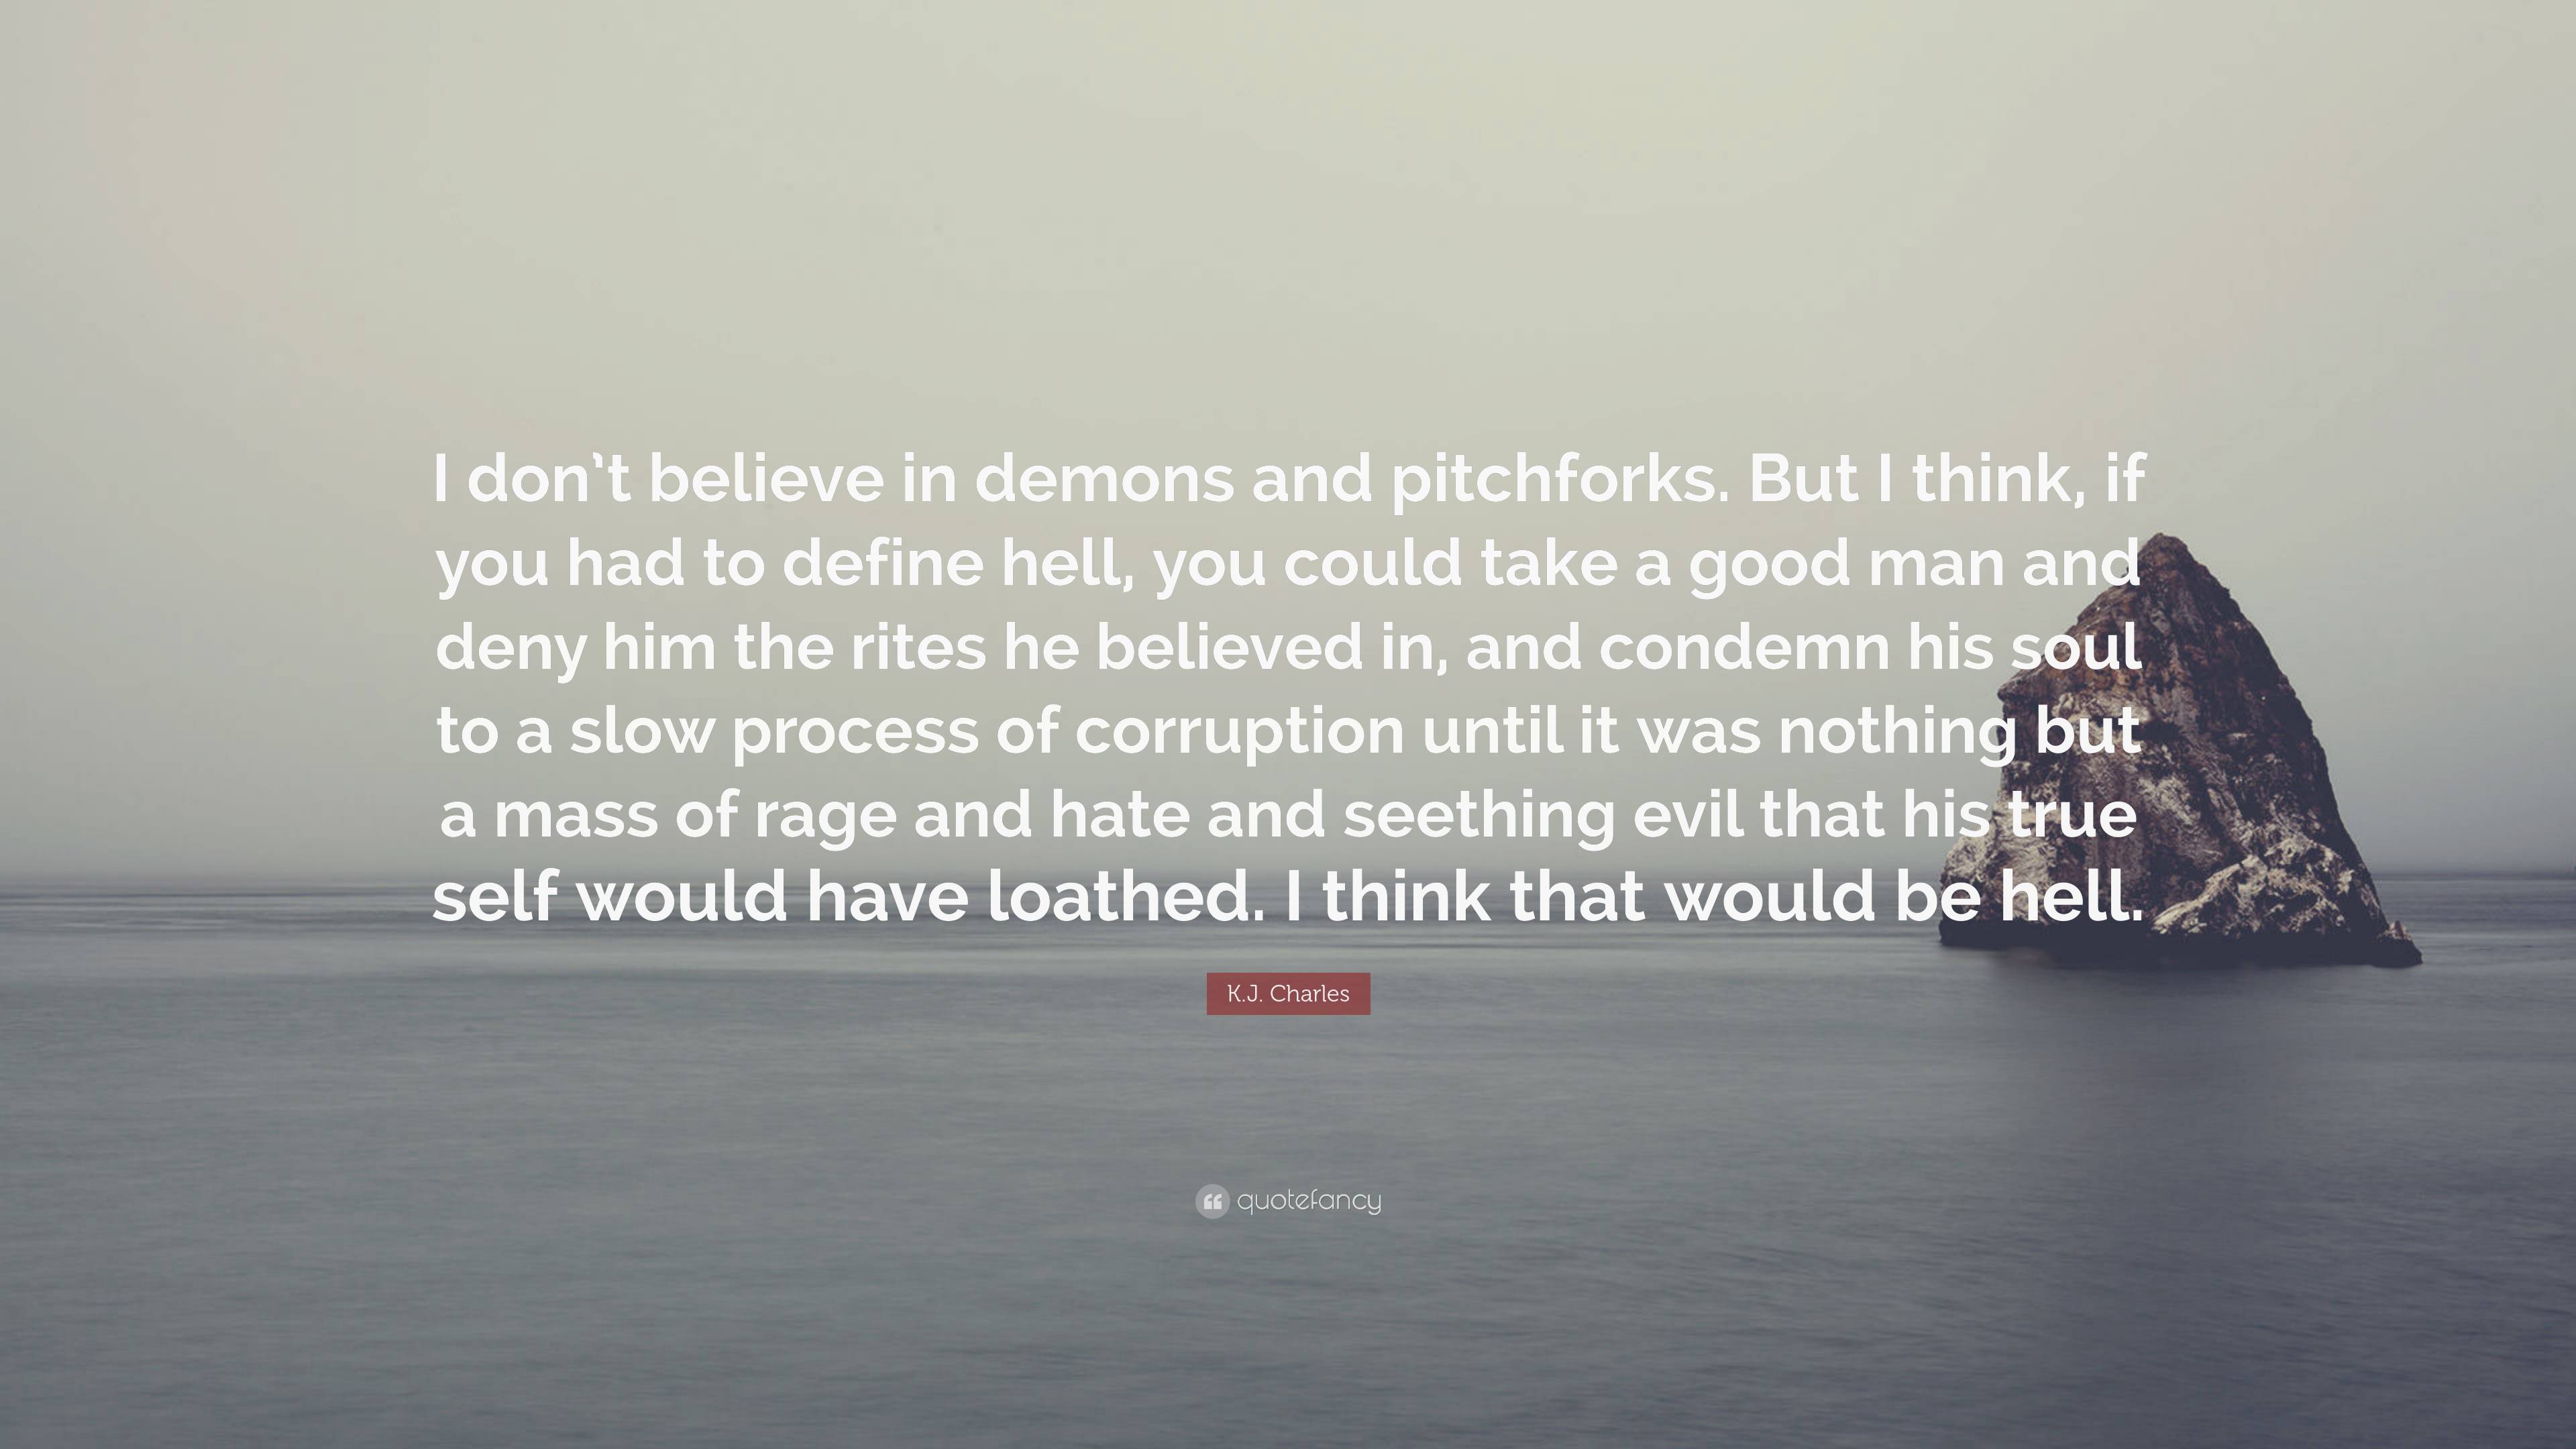 K.J. Charles Quote: “I don’t believe in demons and pitchforks. But I ...